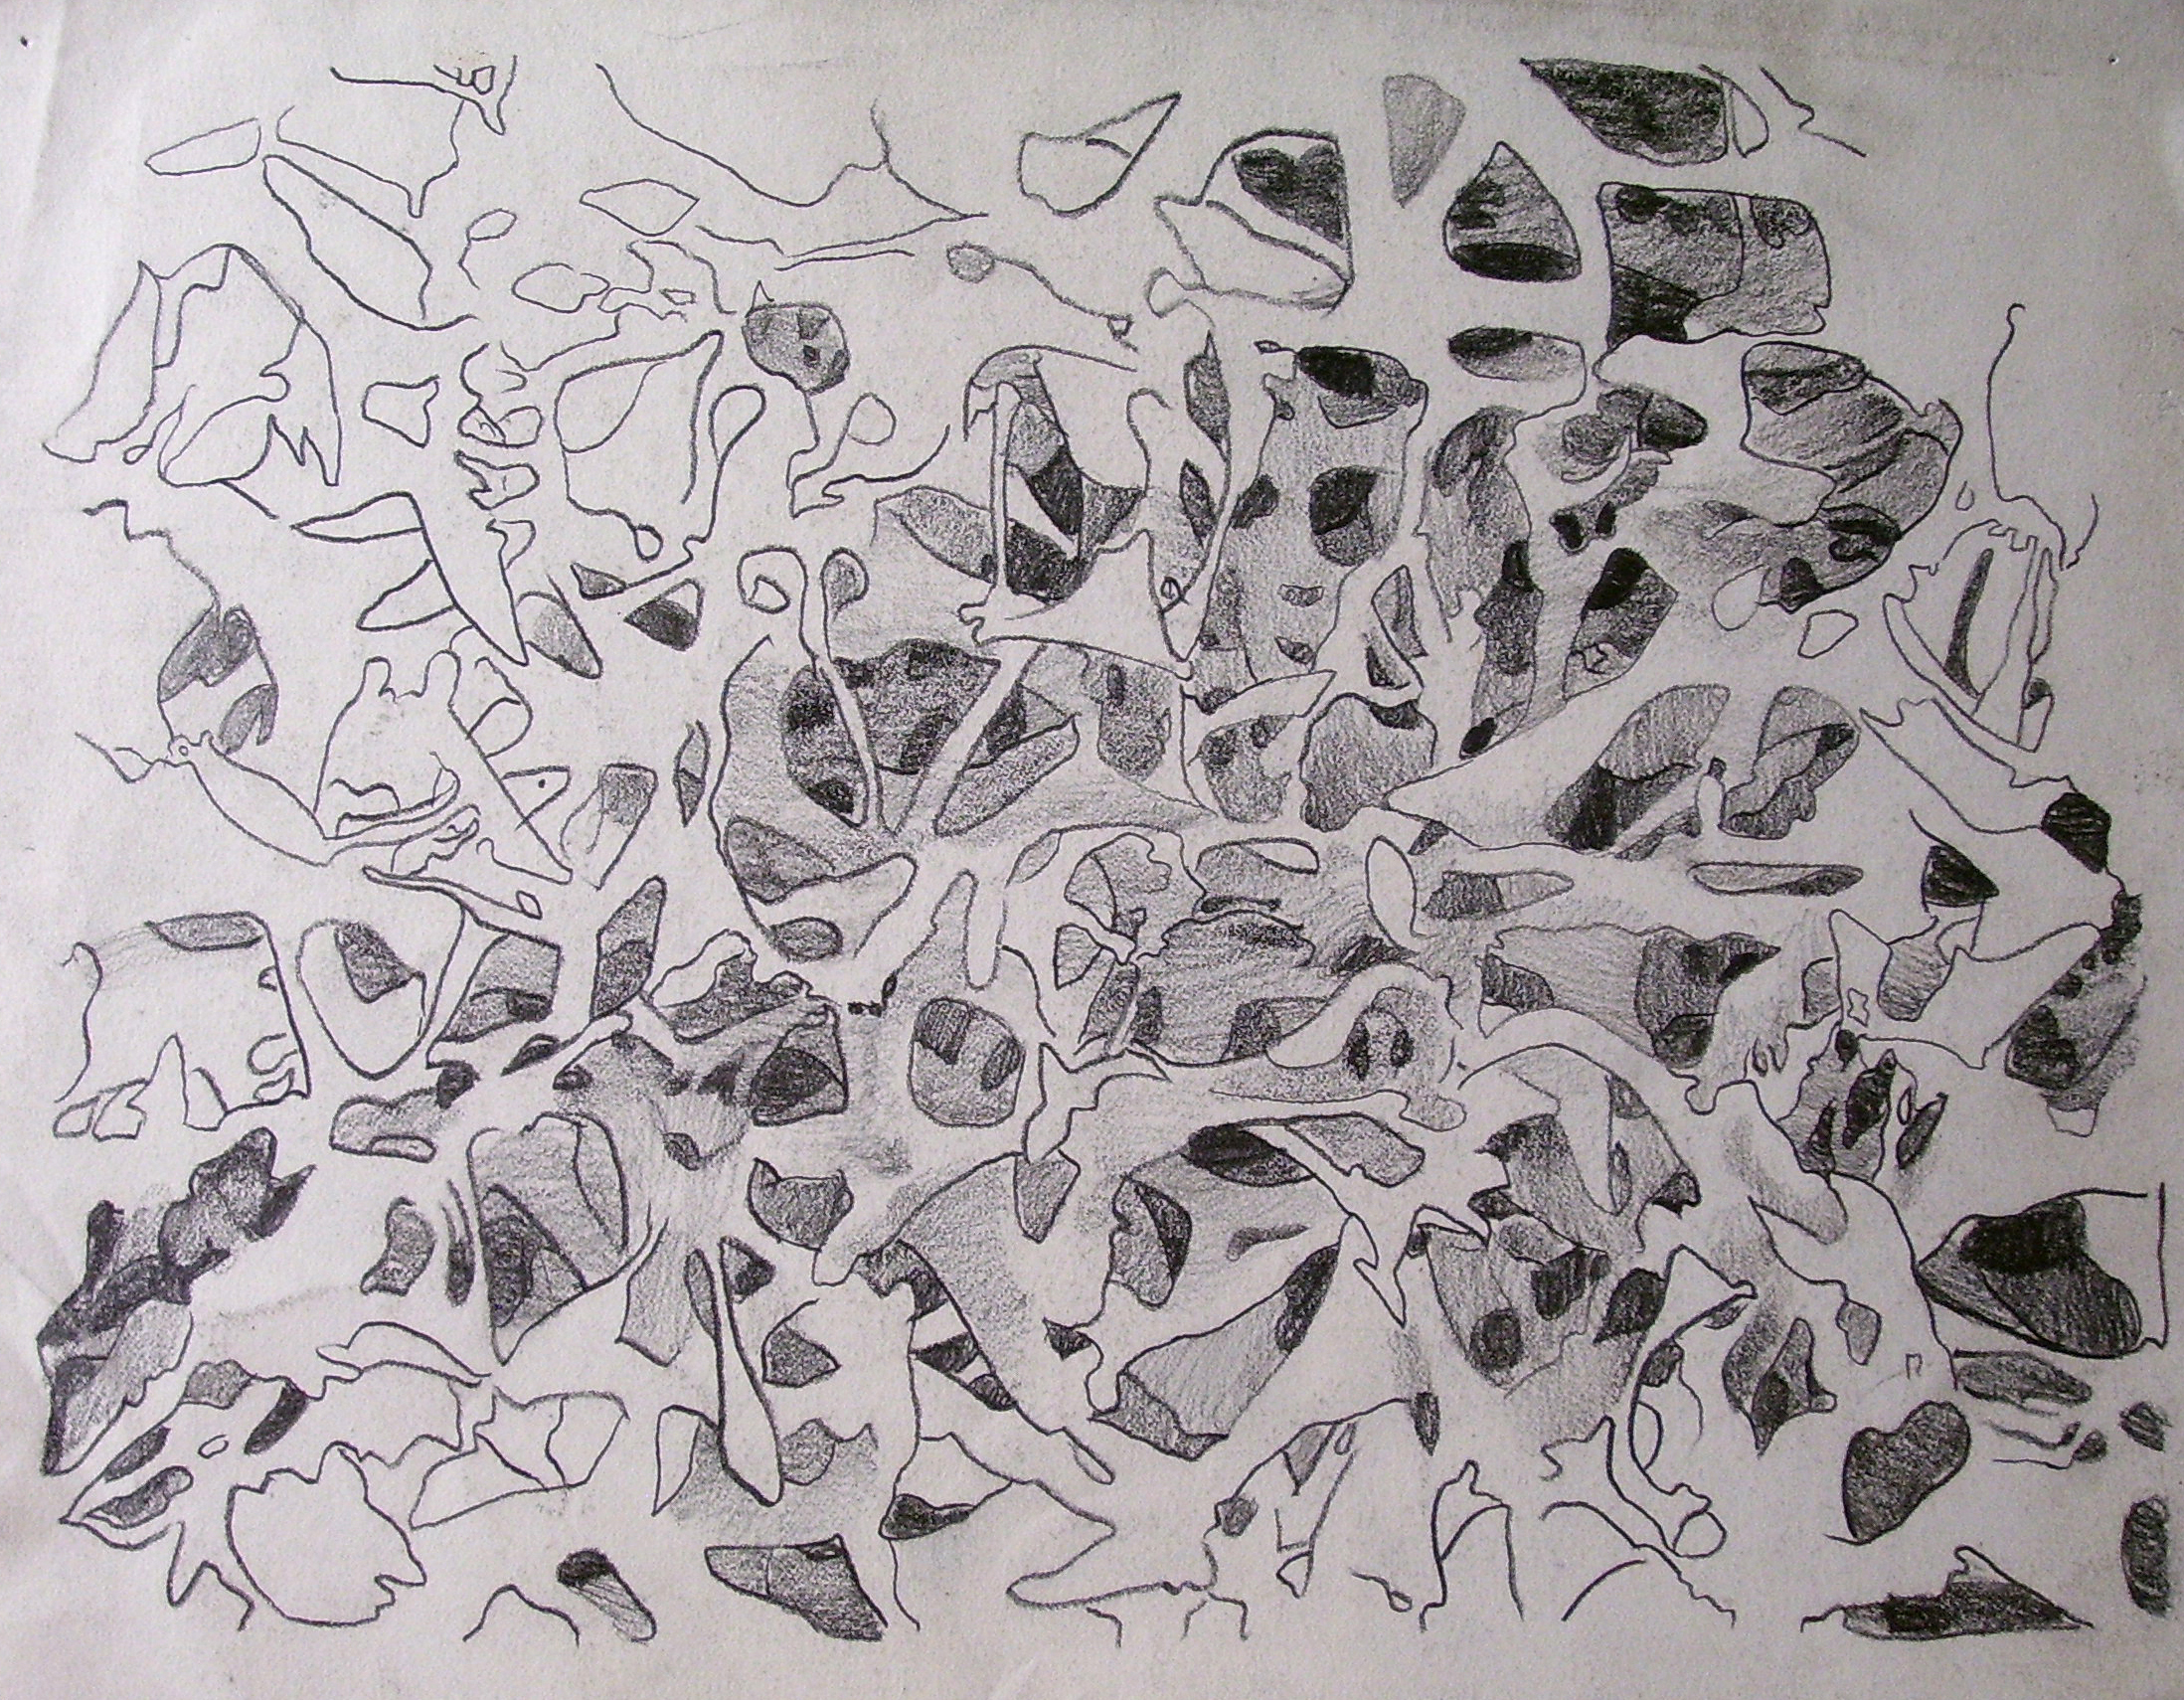  Galactic Sponge/ 2004/ graphite on paper/ 9 x 12 inches 